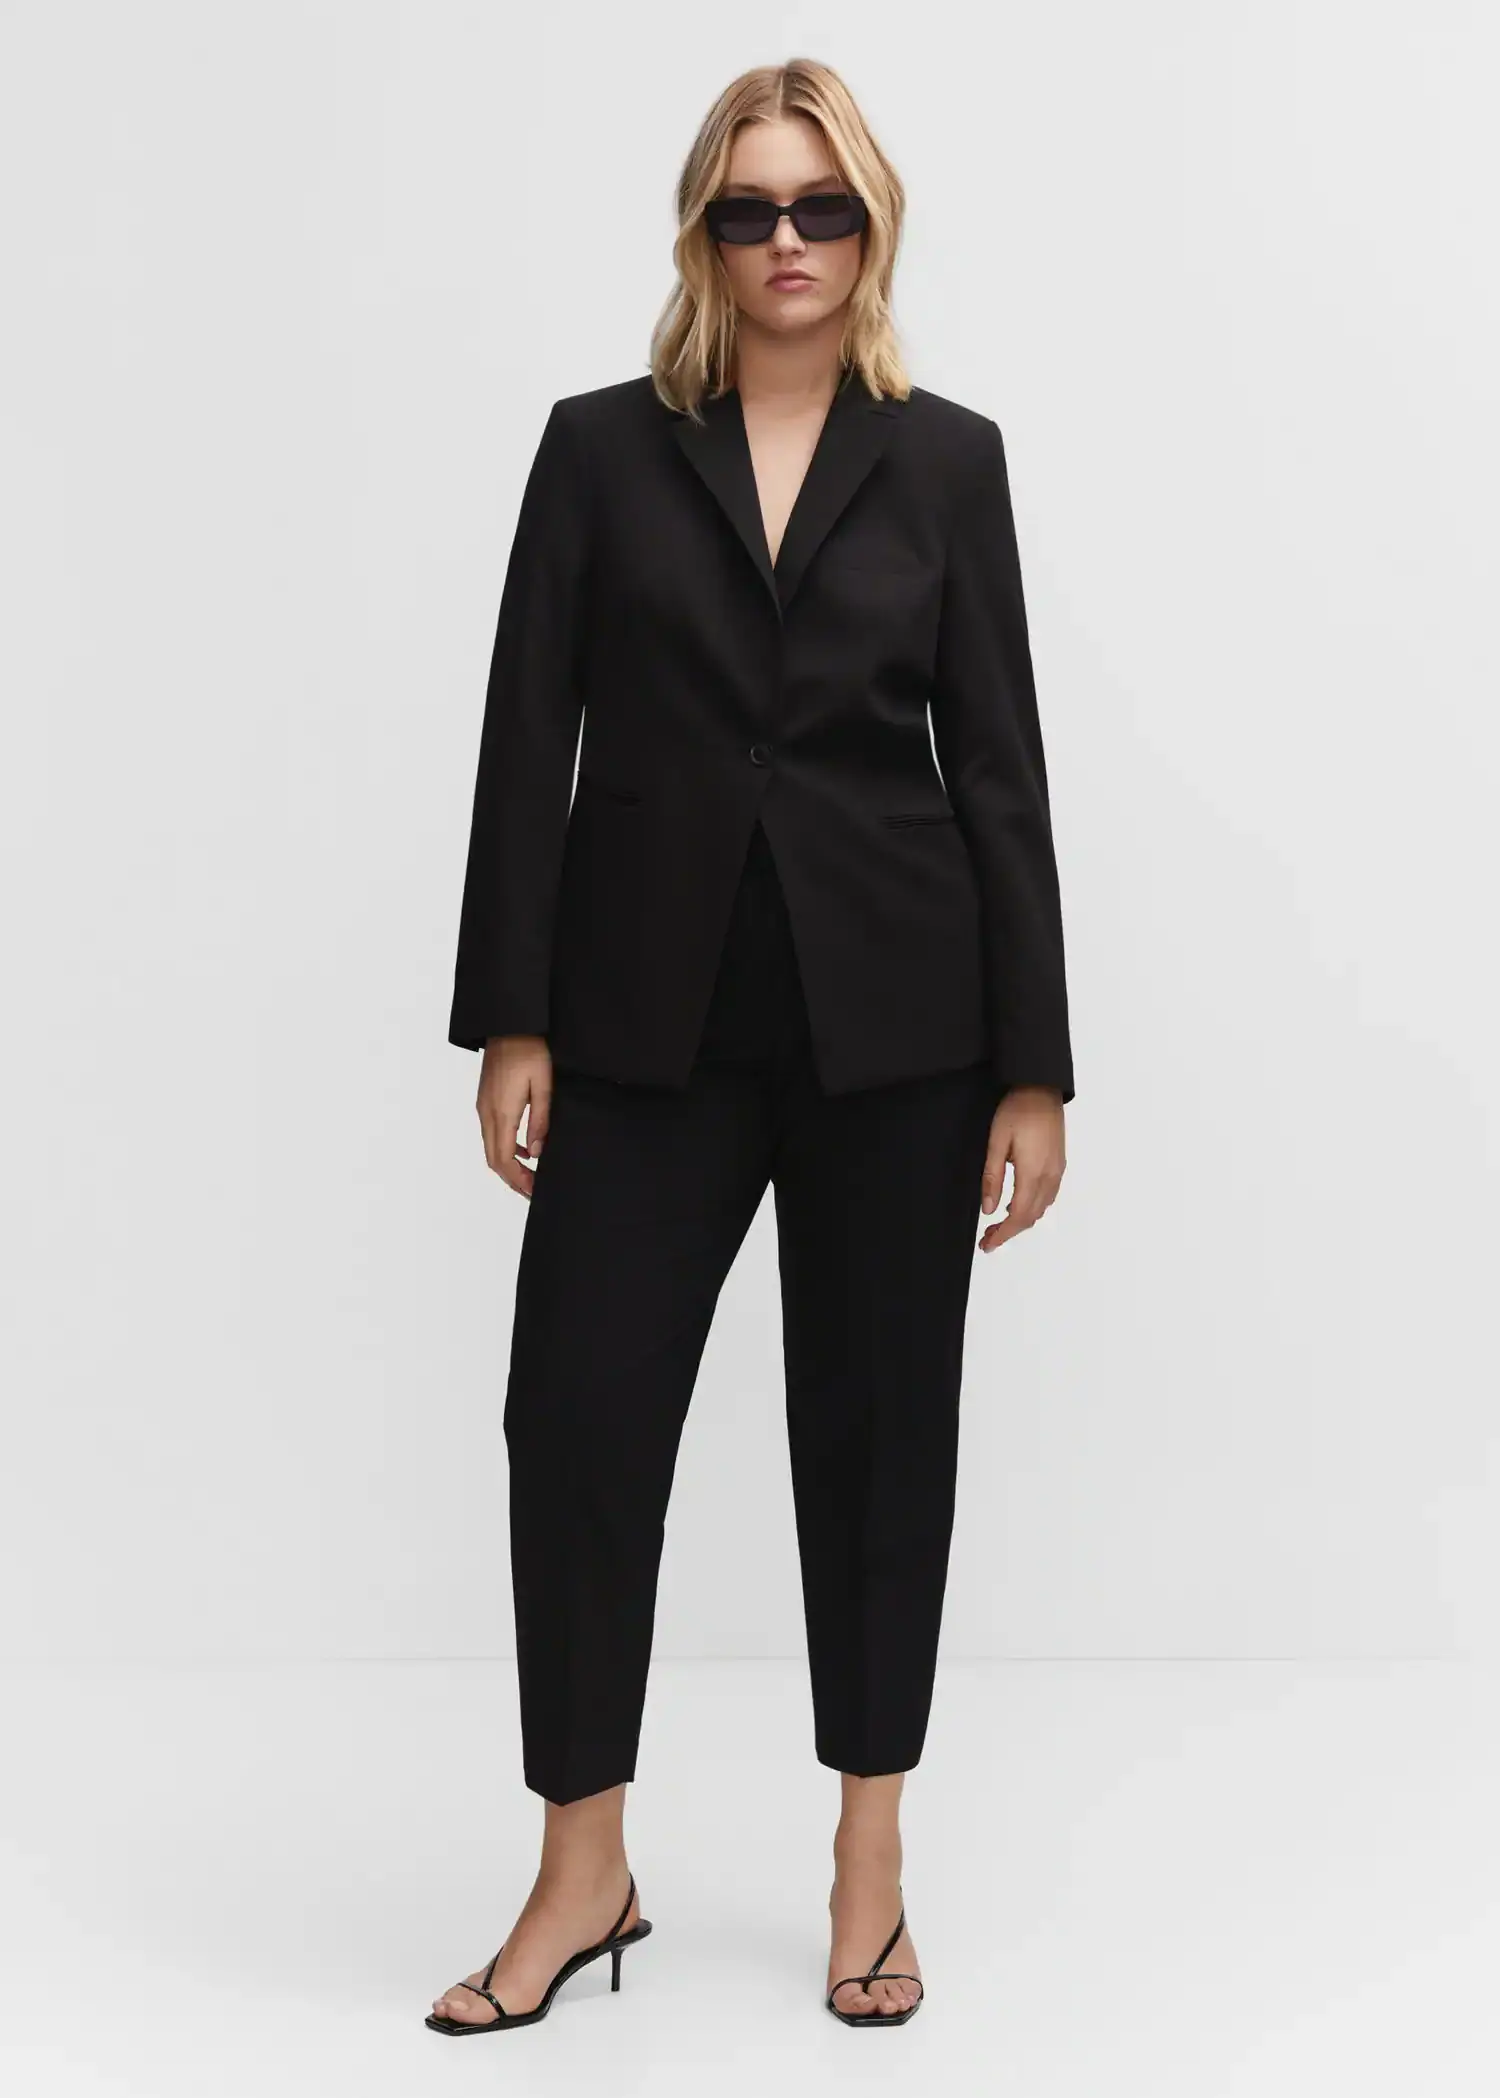 Mango Fitted suit blazer. a woman wearing a black suit standing in front of a white wall. 